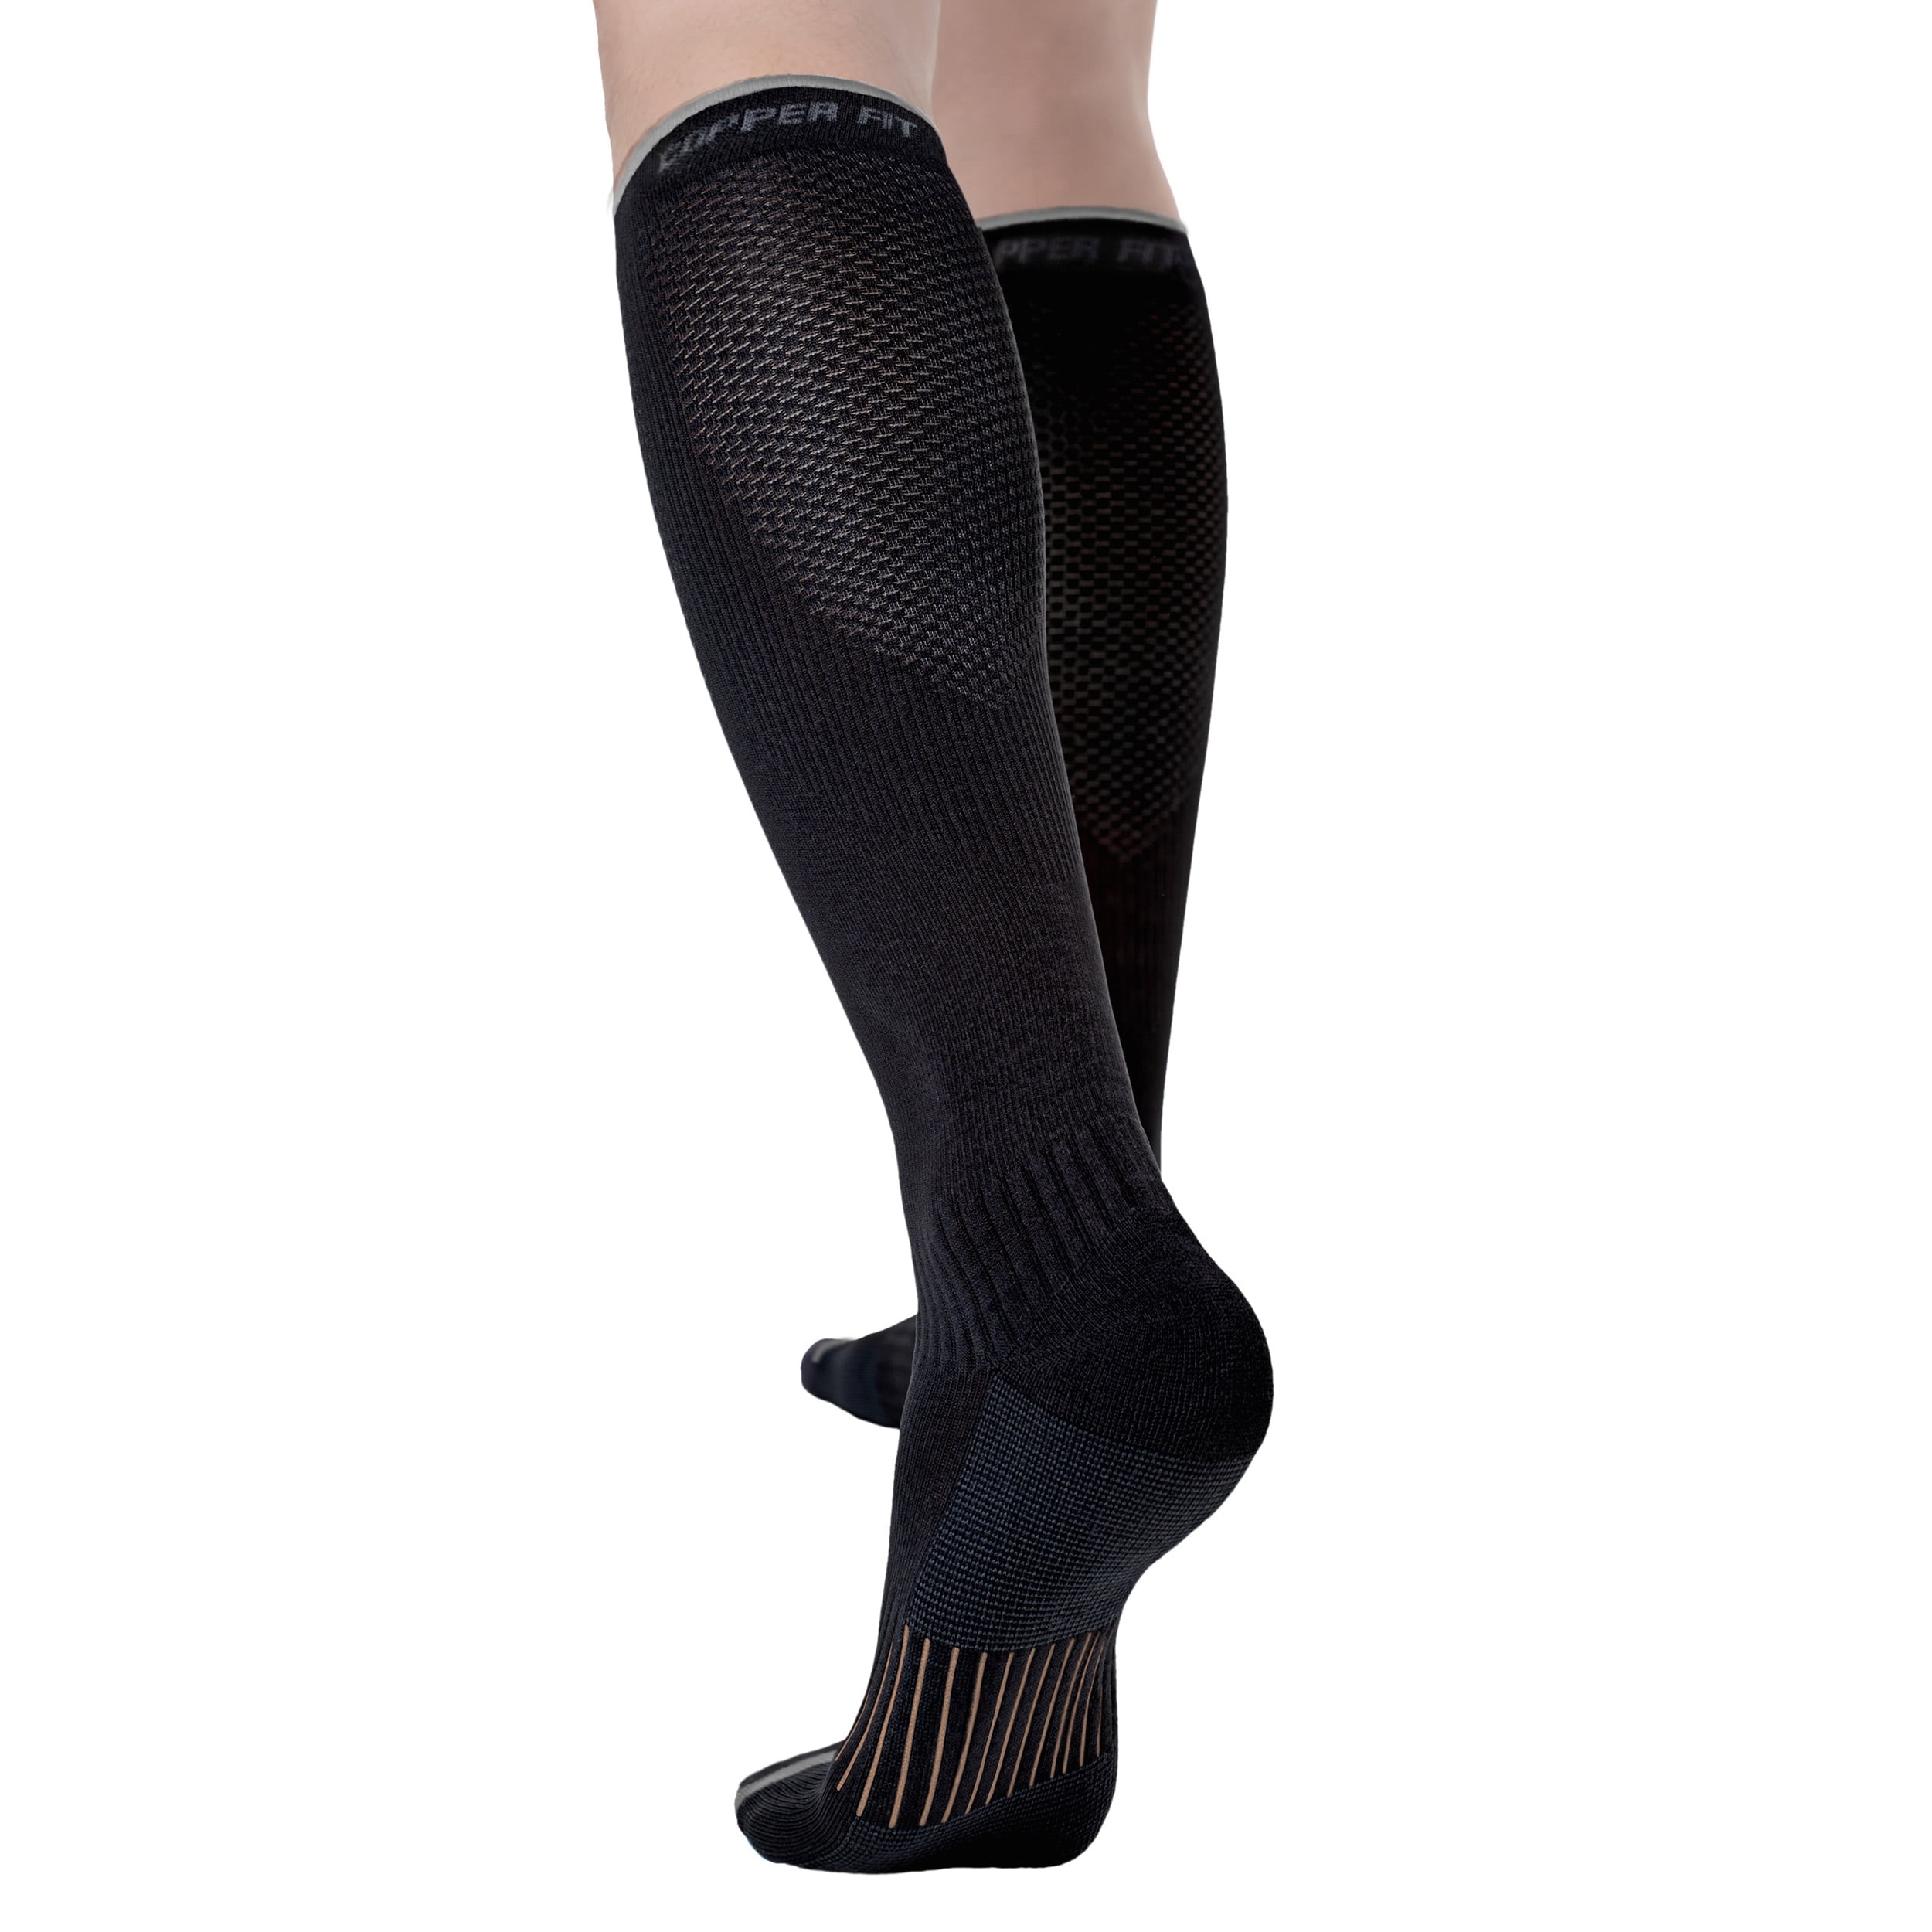 Copper Fit Energy Unisex Easy-On/Easy-Off Knee Compression Socks, Black, L/XL, 1 Pair